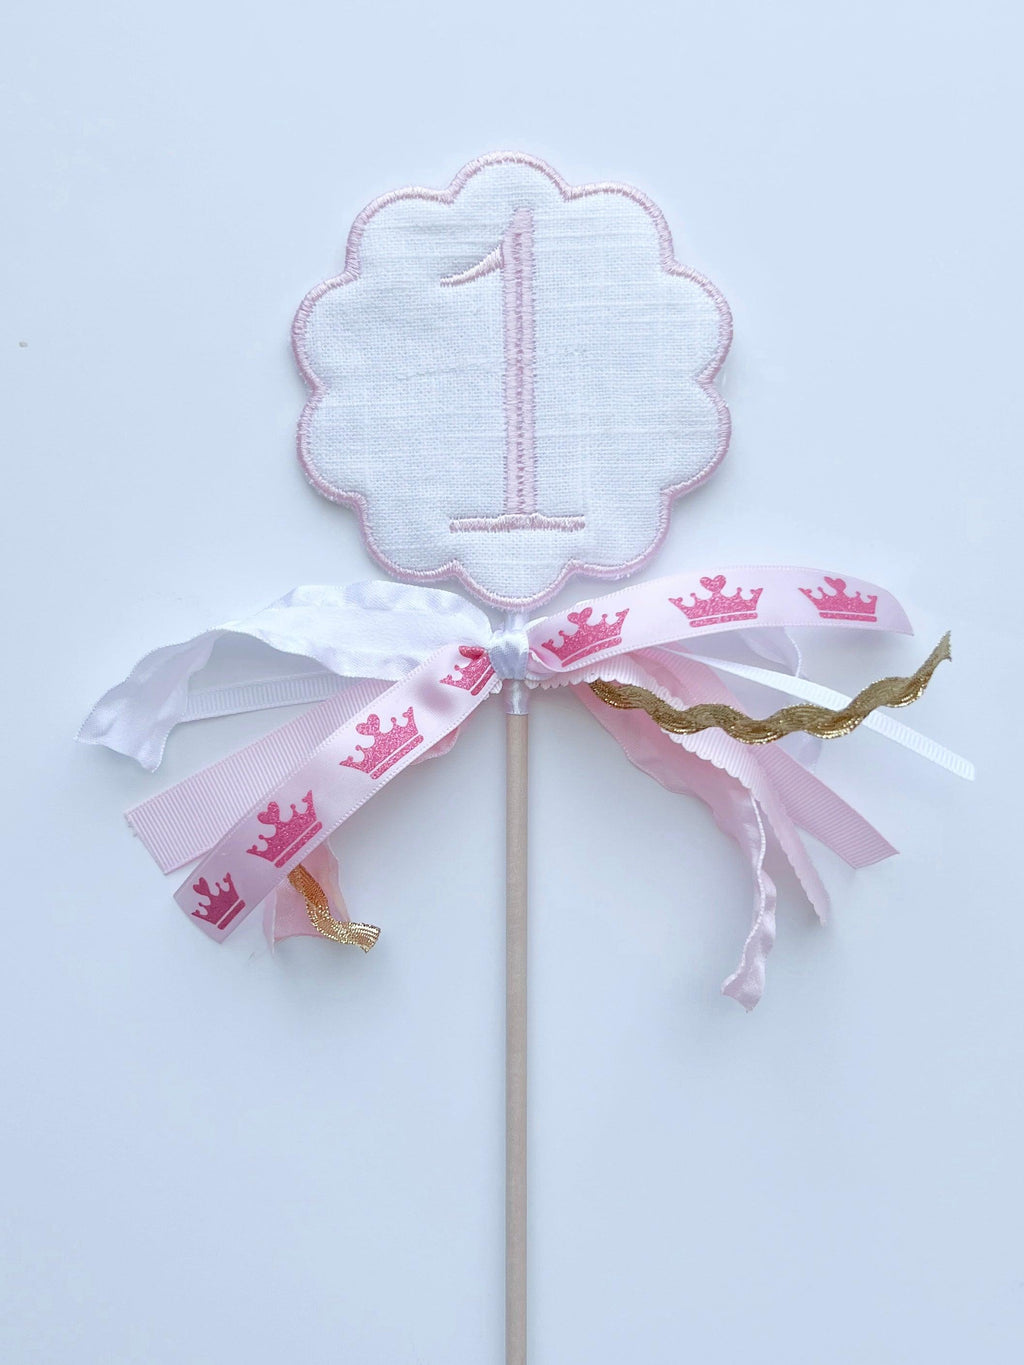 Cake Topper - Custom | Nashville Bow Co. - Classic Hair Bows, Bow Ties, Basket Bows, Pacifier Clips, Wreath Sashes, Swaddle Bows. Classic Southern Charm.